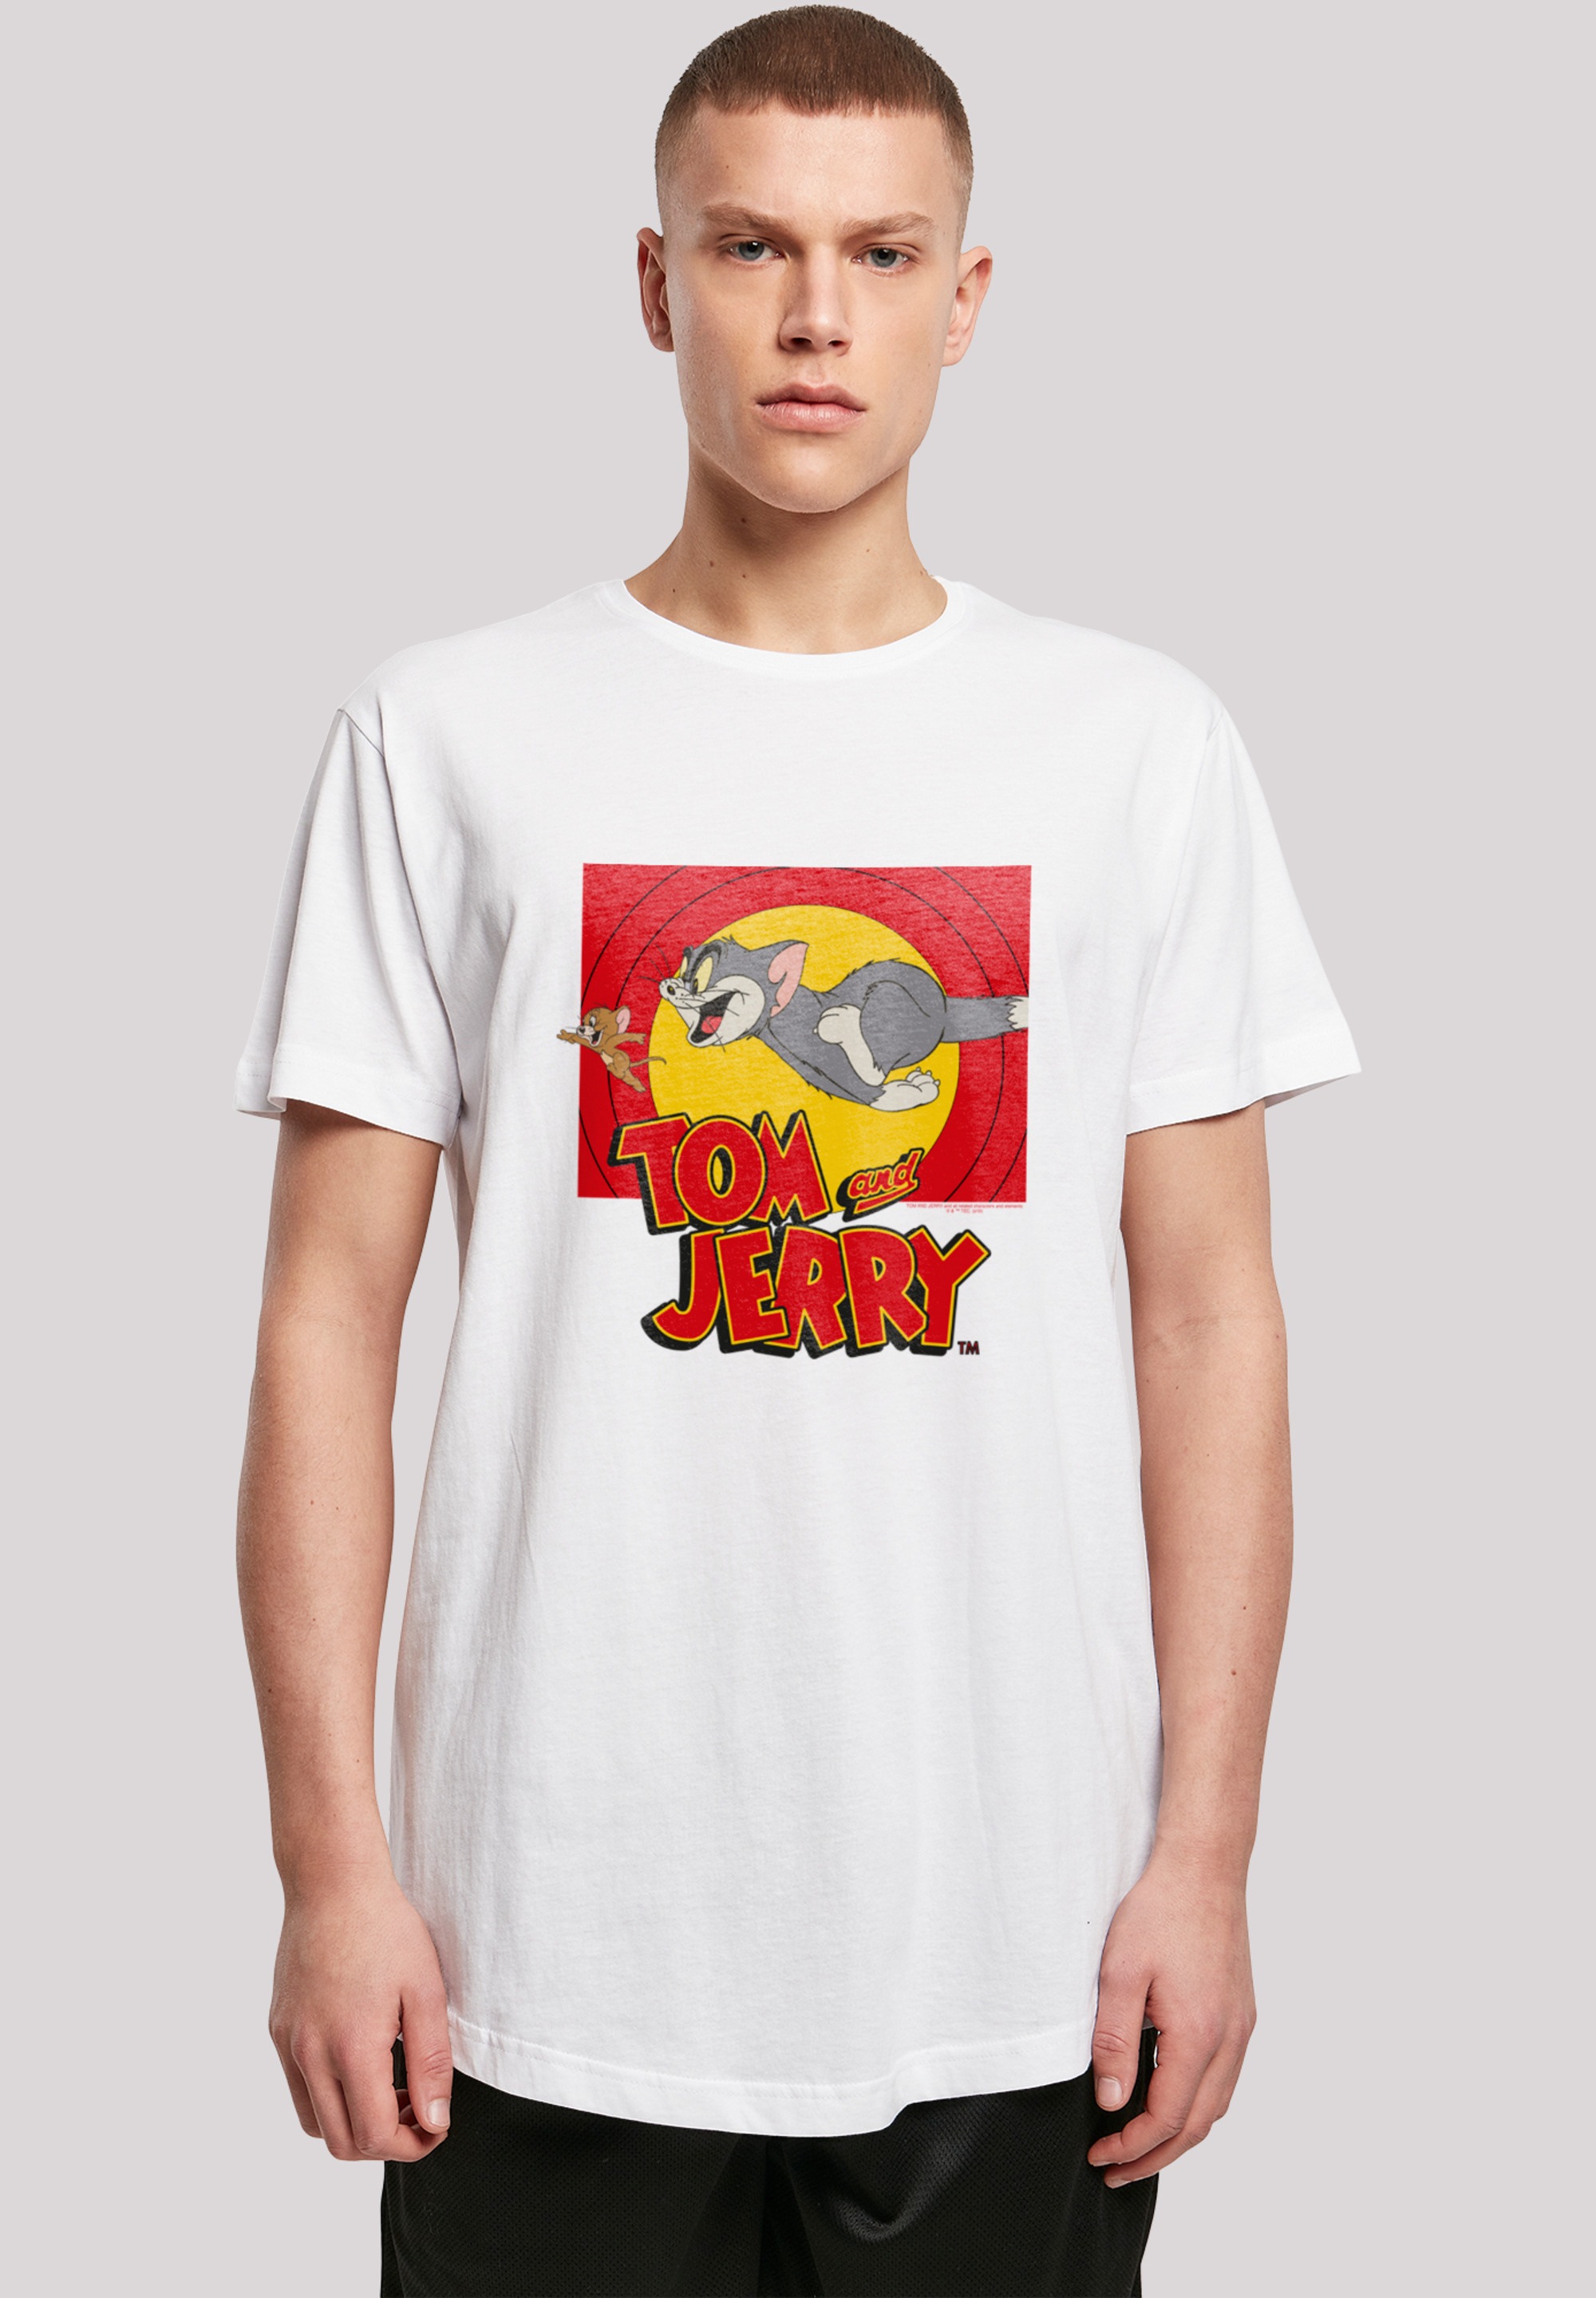 TV F4NT4STIC and »Tom T-Shirt Jerry ▷ Print Chase BAUR für Serie | Scene«,